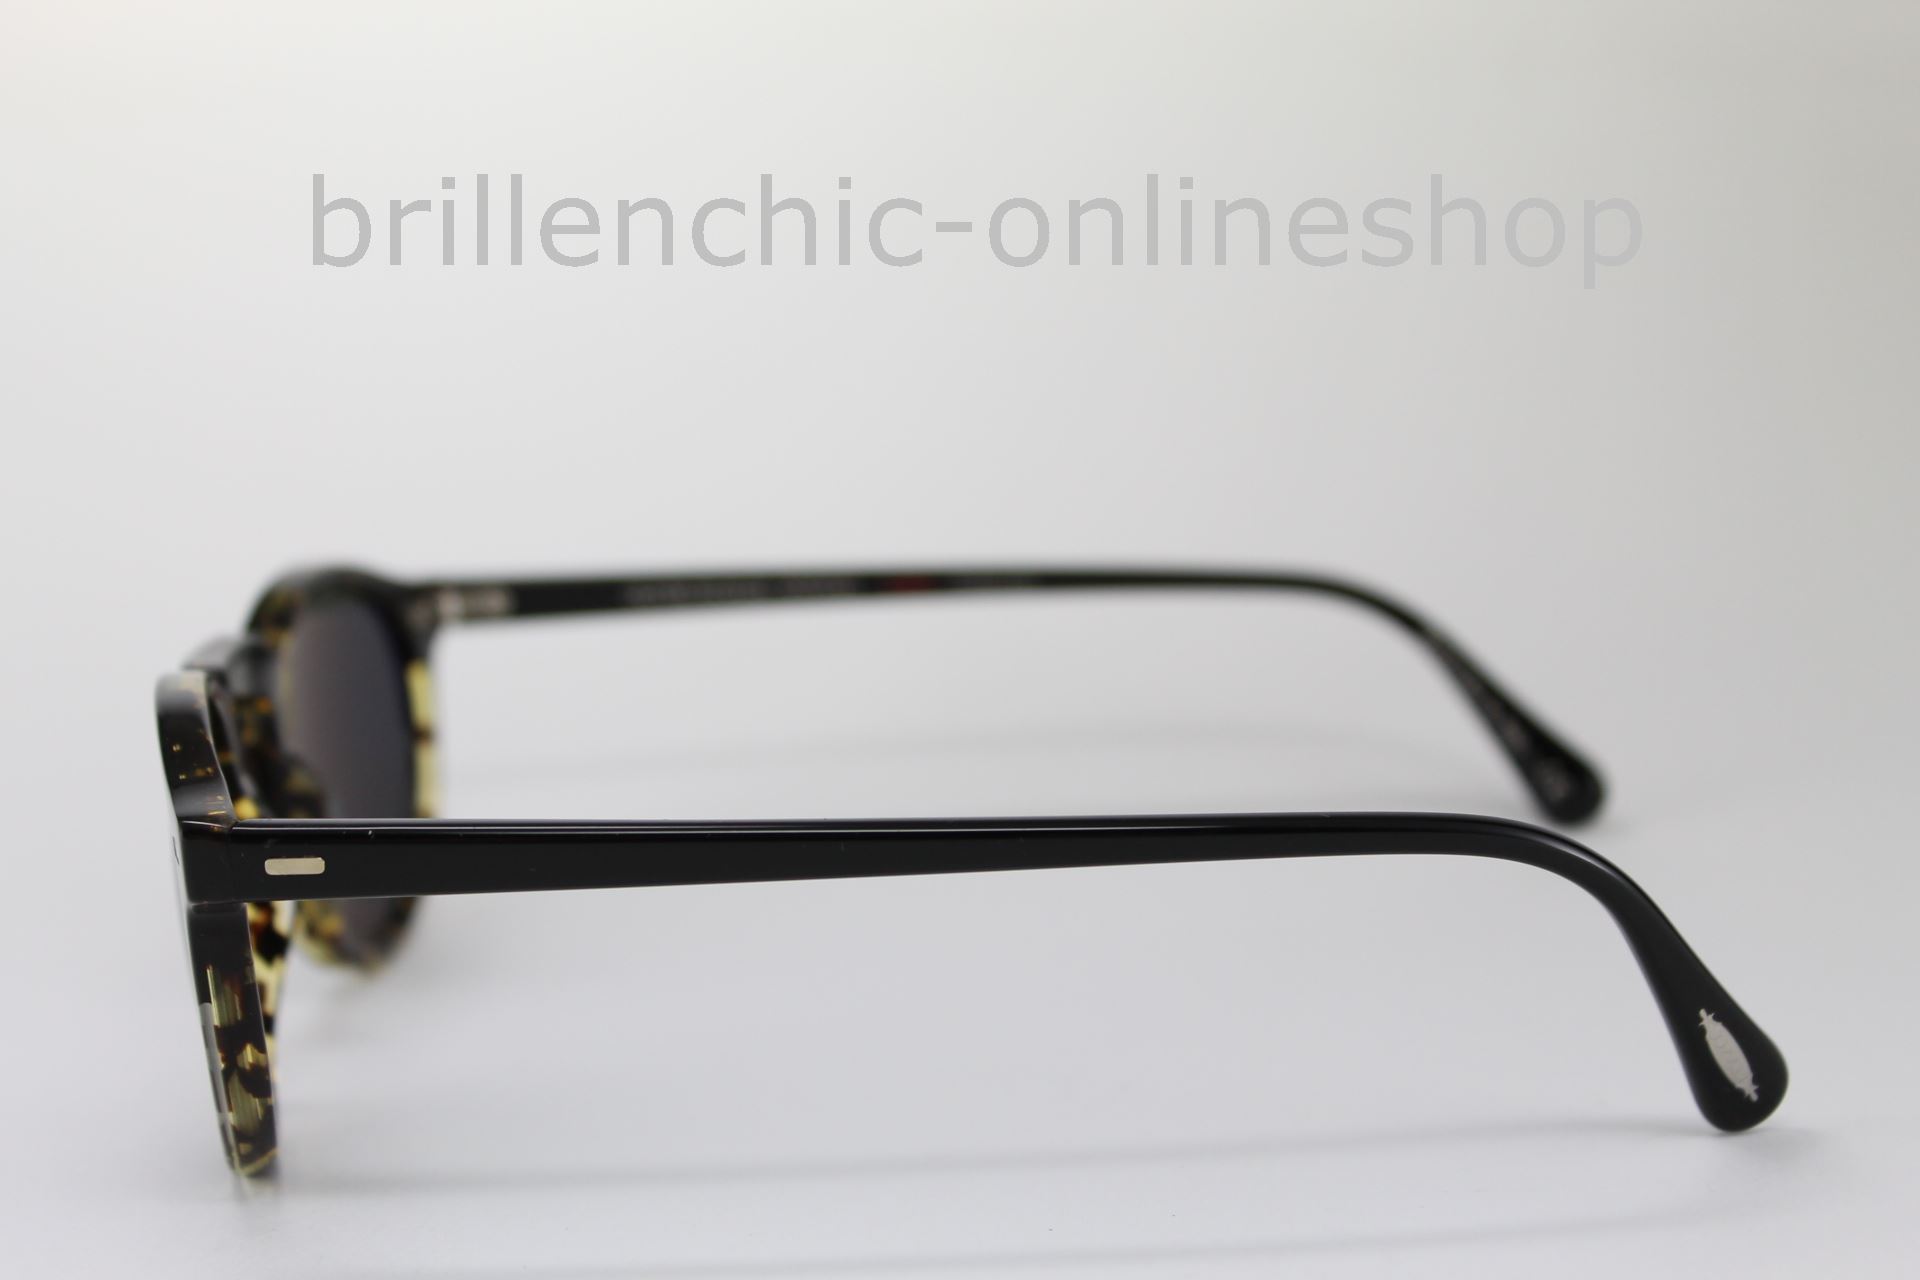 Brillenchic-onlineshop in Berlin - OLIVER PEOPLES GREGORY PECK SUN OV 5217S  5217 1178/P1 - POLARIZED 